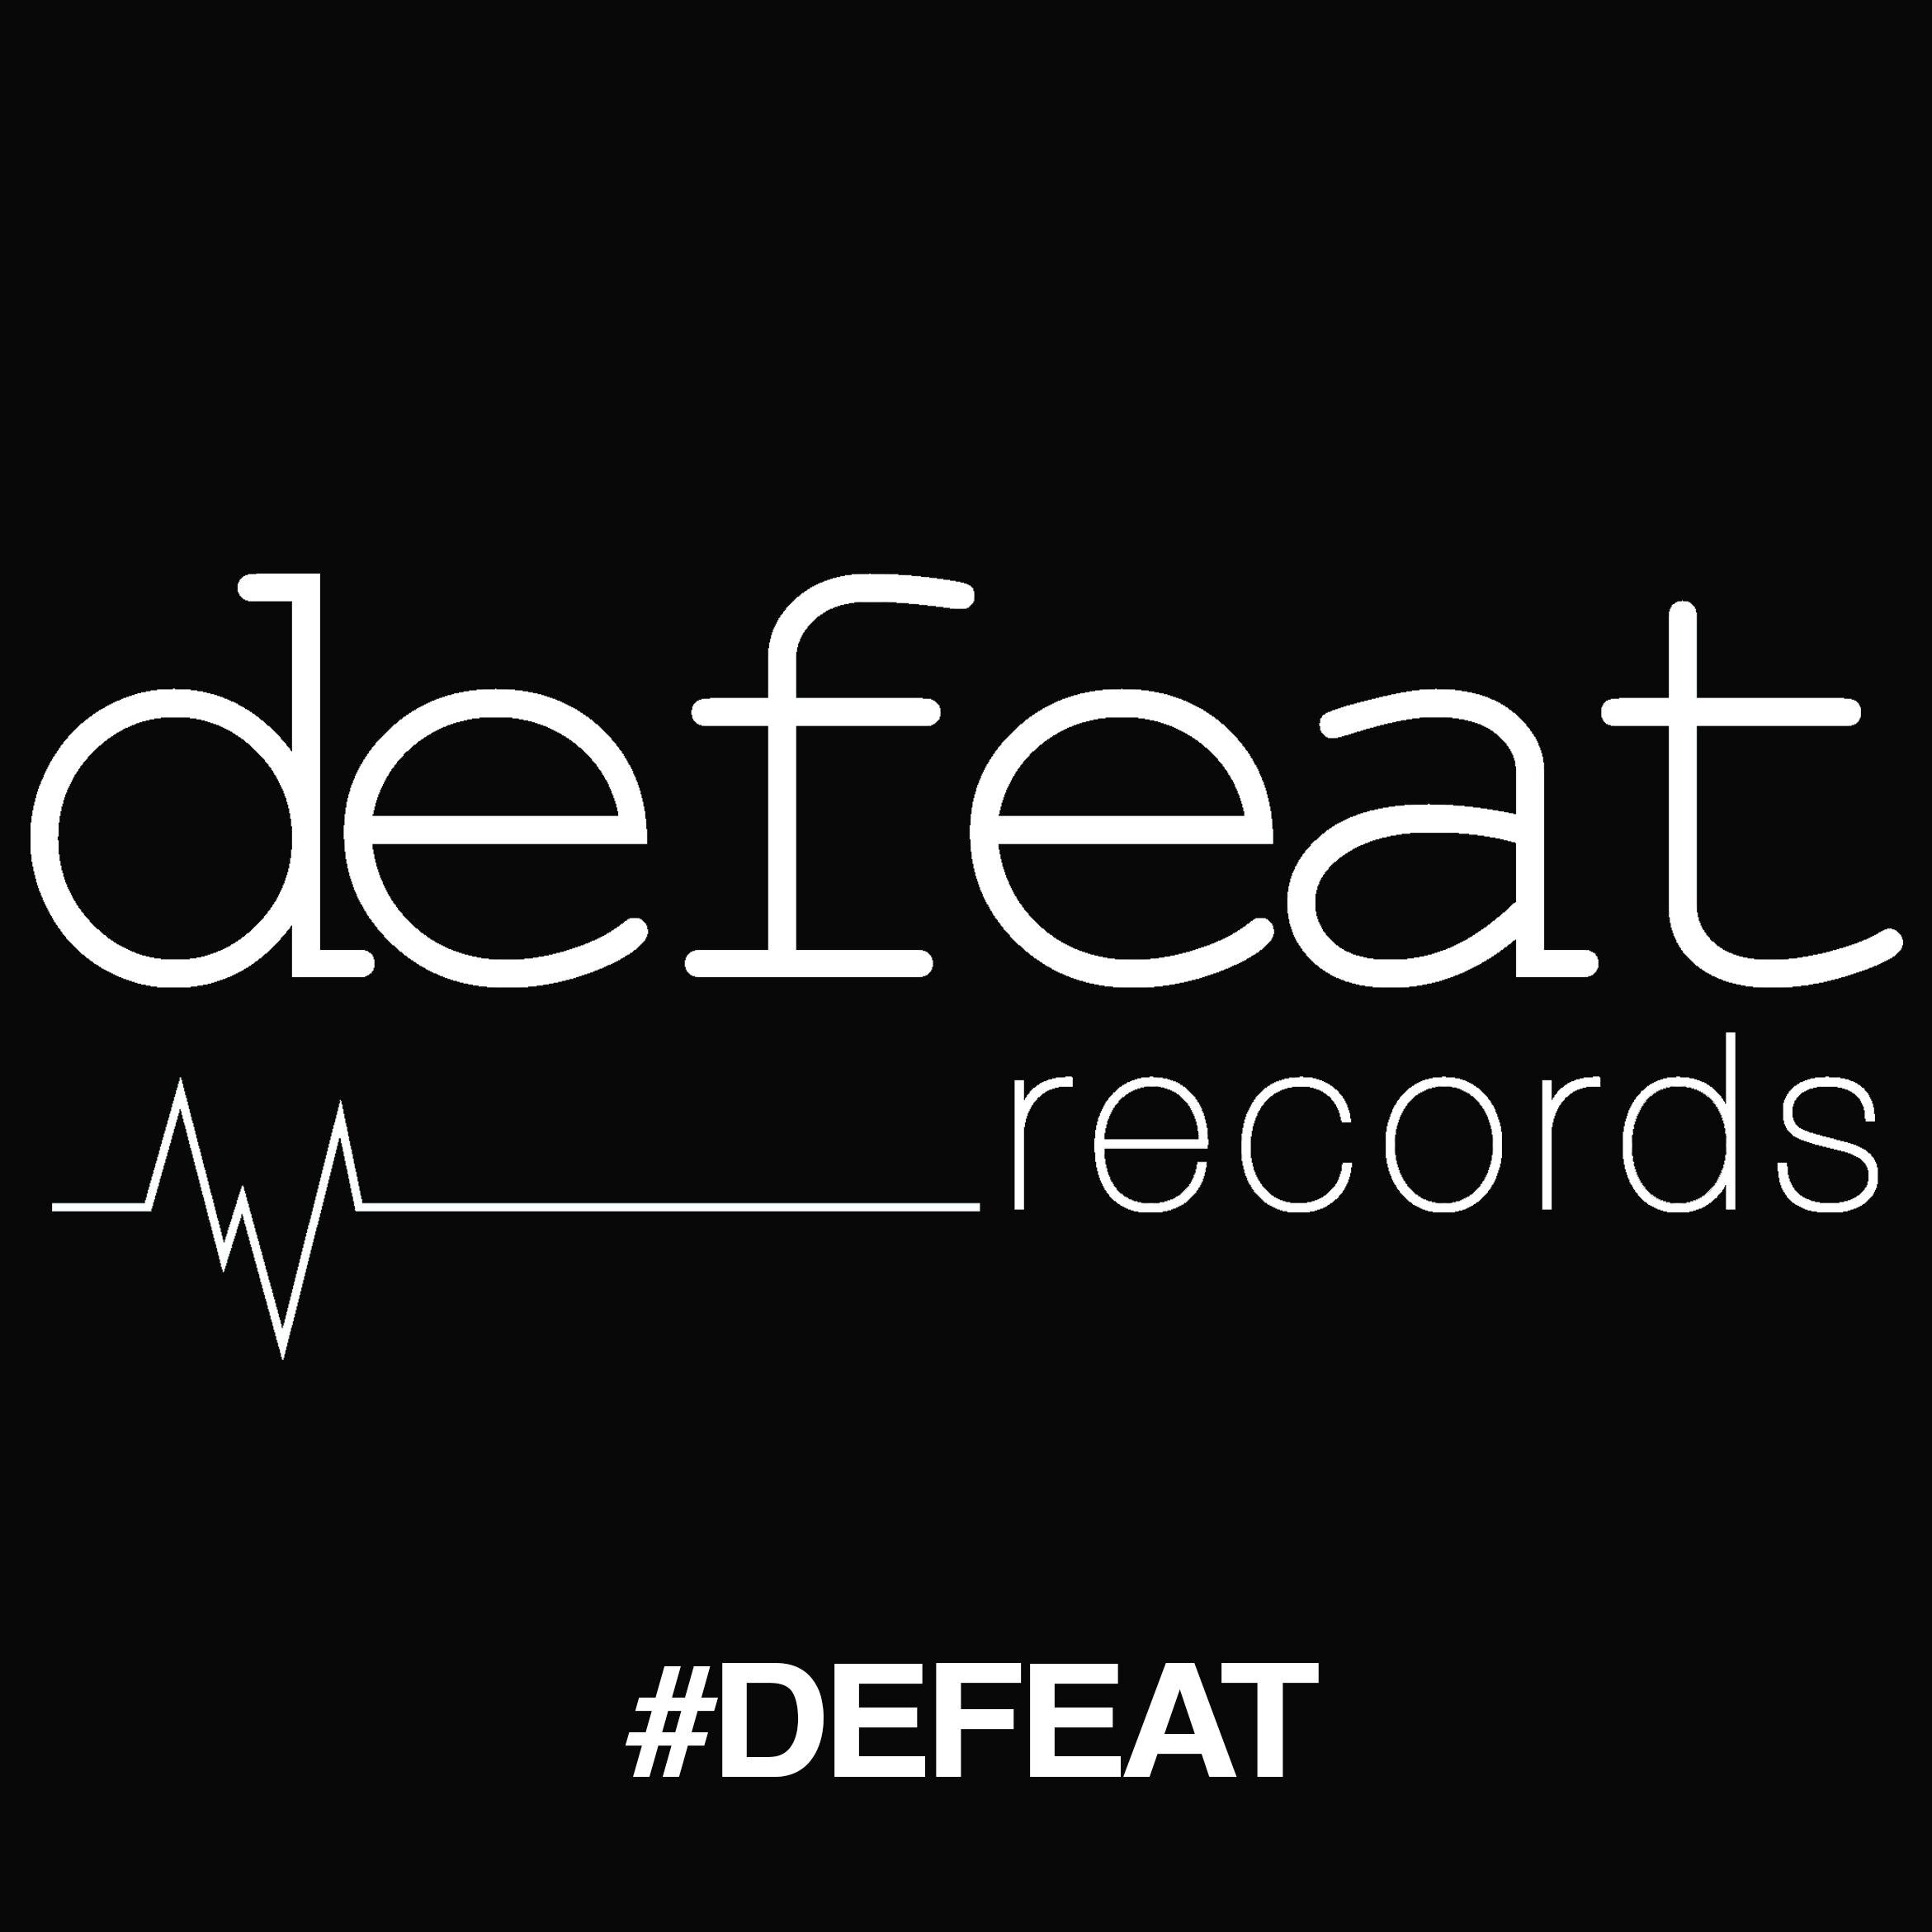 Label & Productions - House,Deep House,Soulful,Tech House  https://t.co/WO9tyajLN3  info@defeatrecords.com